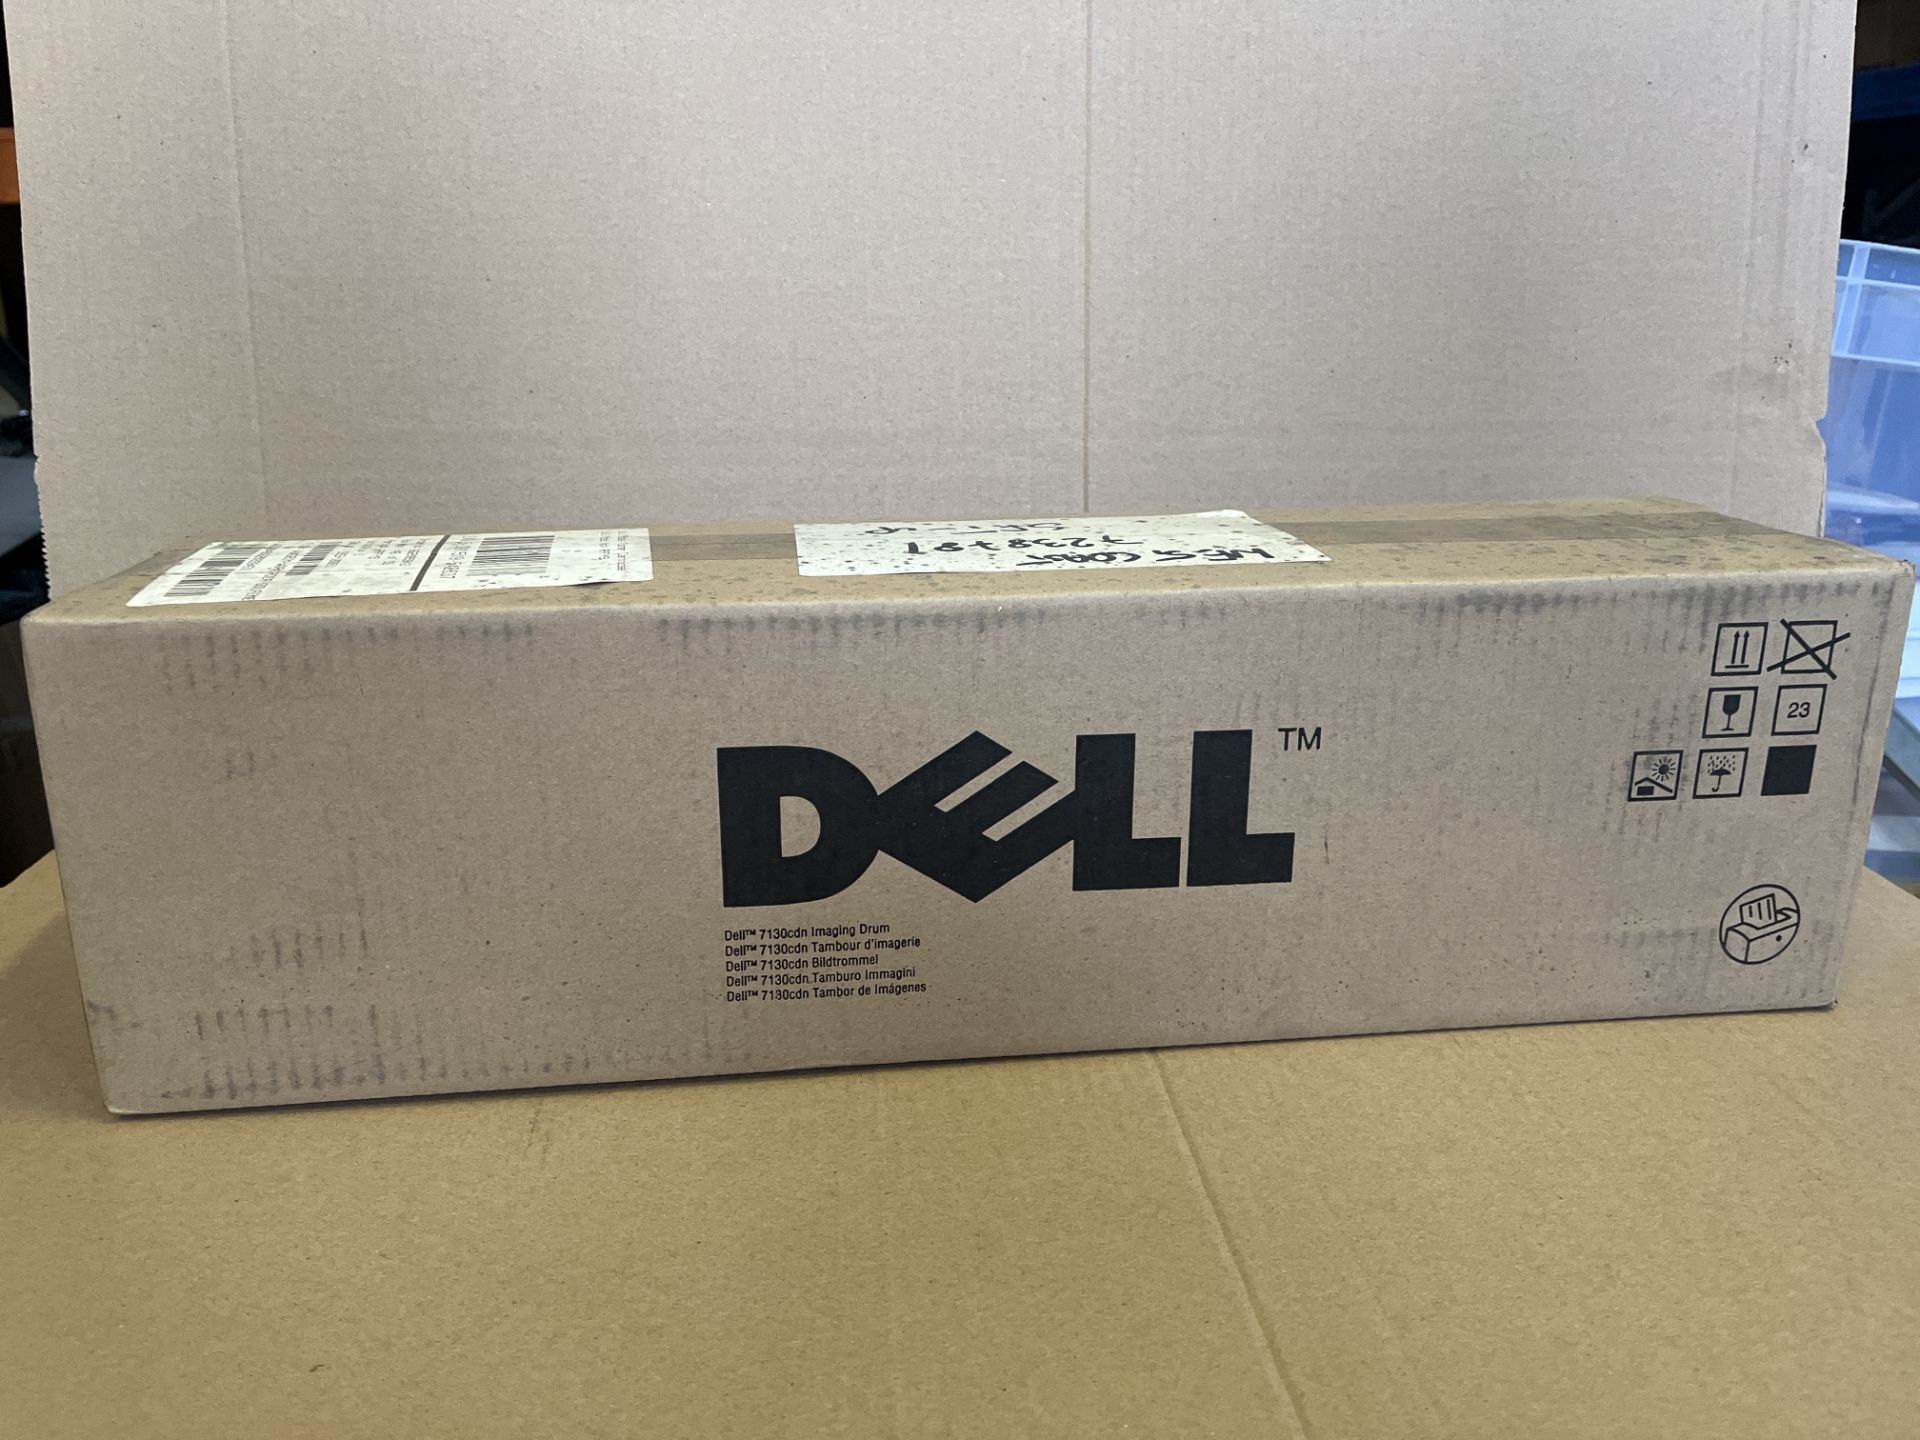 BRAND NEW DELL 595-10881 7130 IMAGING DRUM RRP £259 S1-30